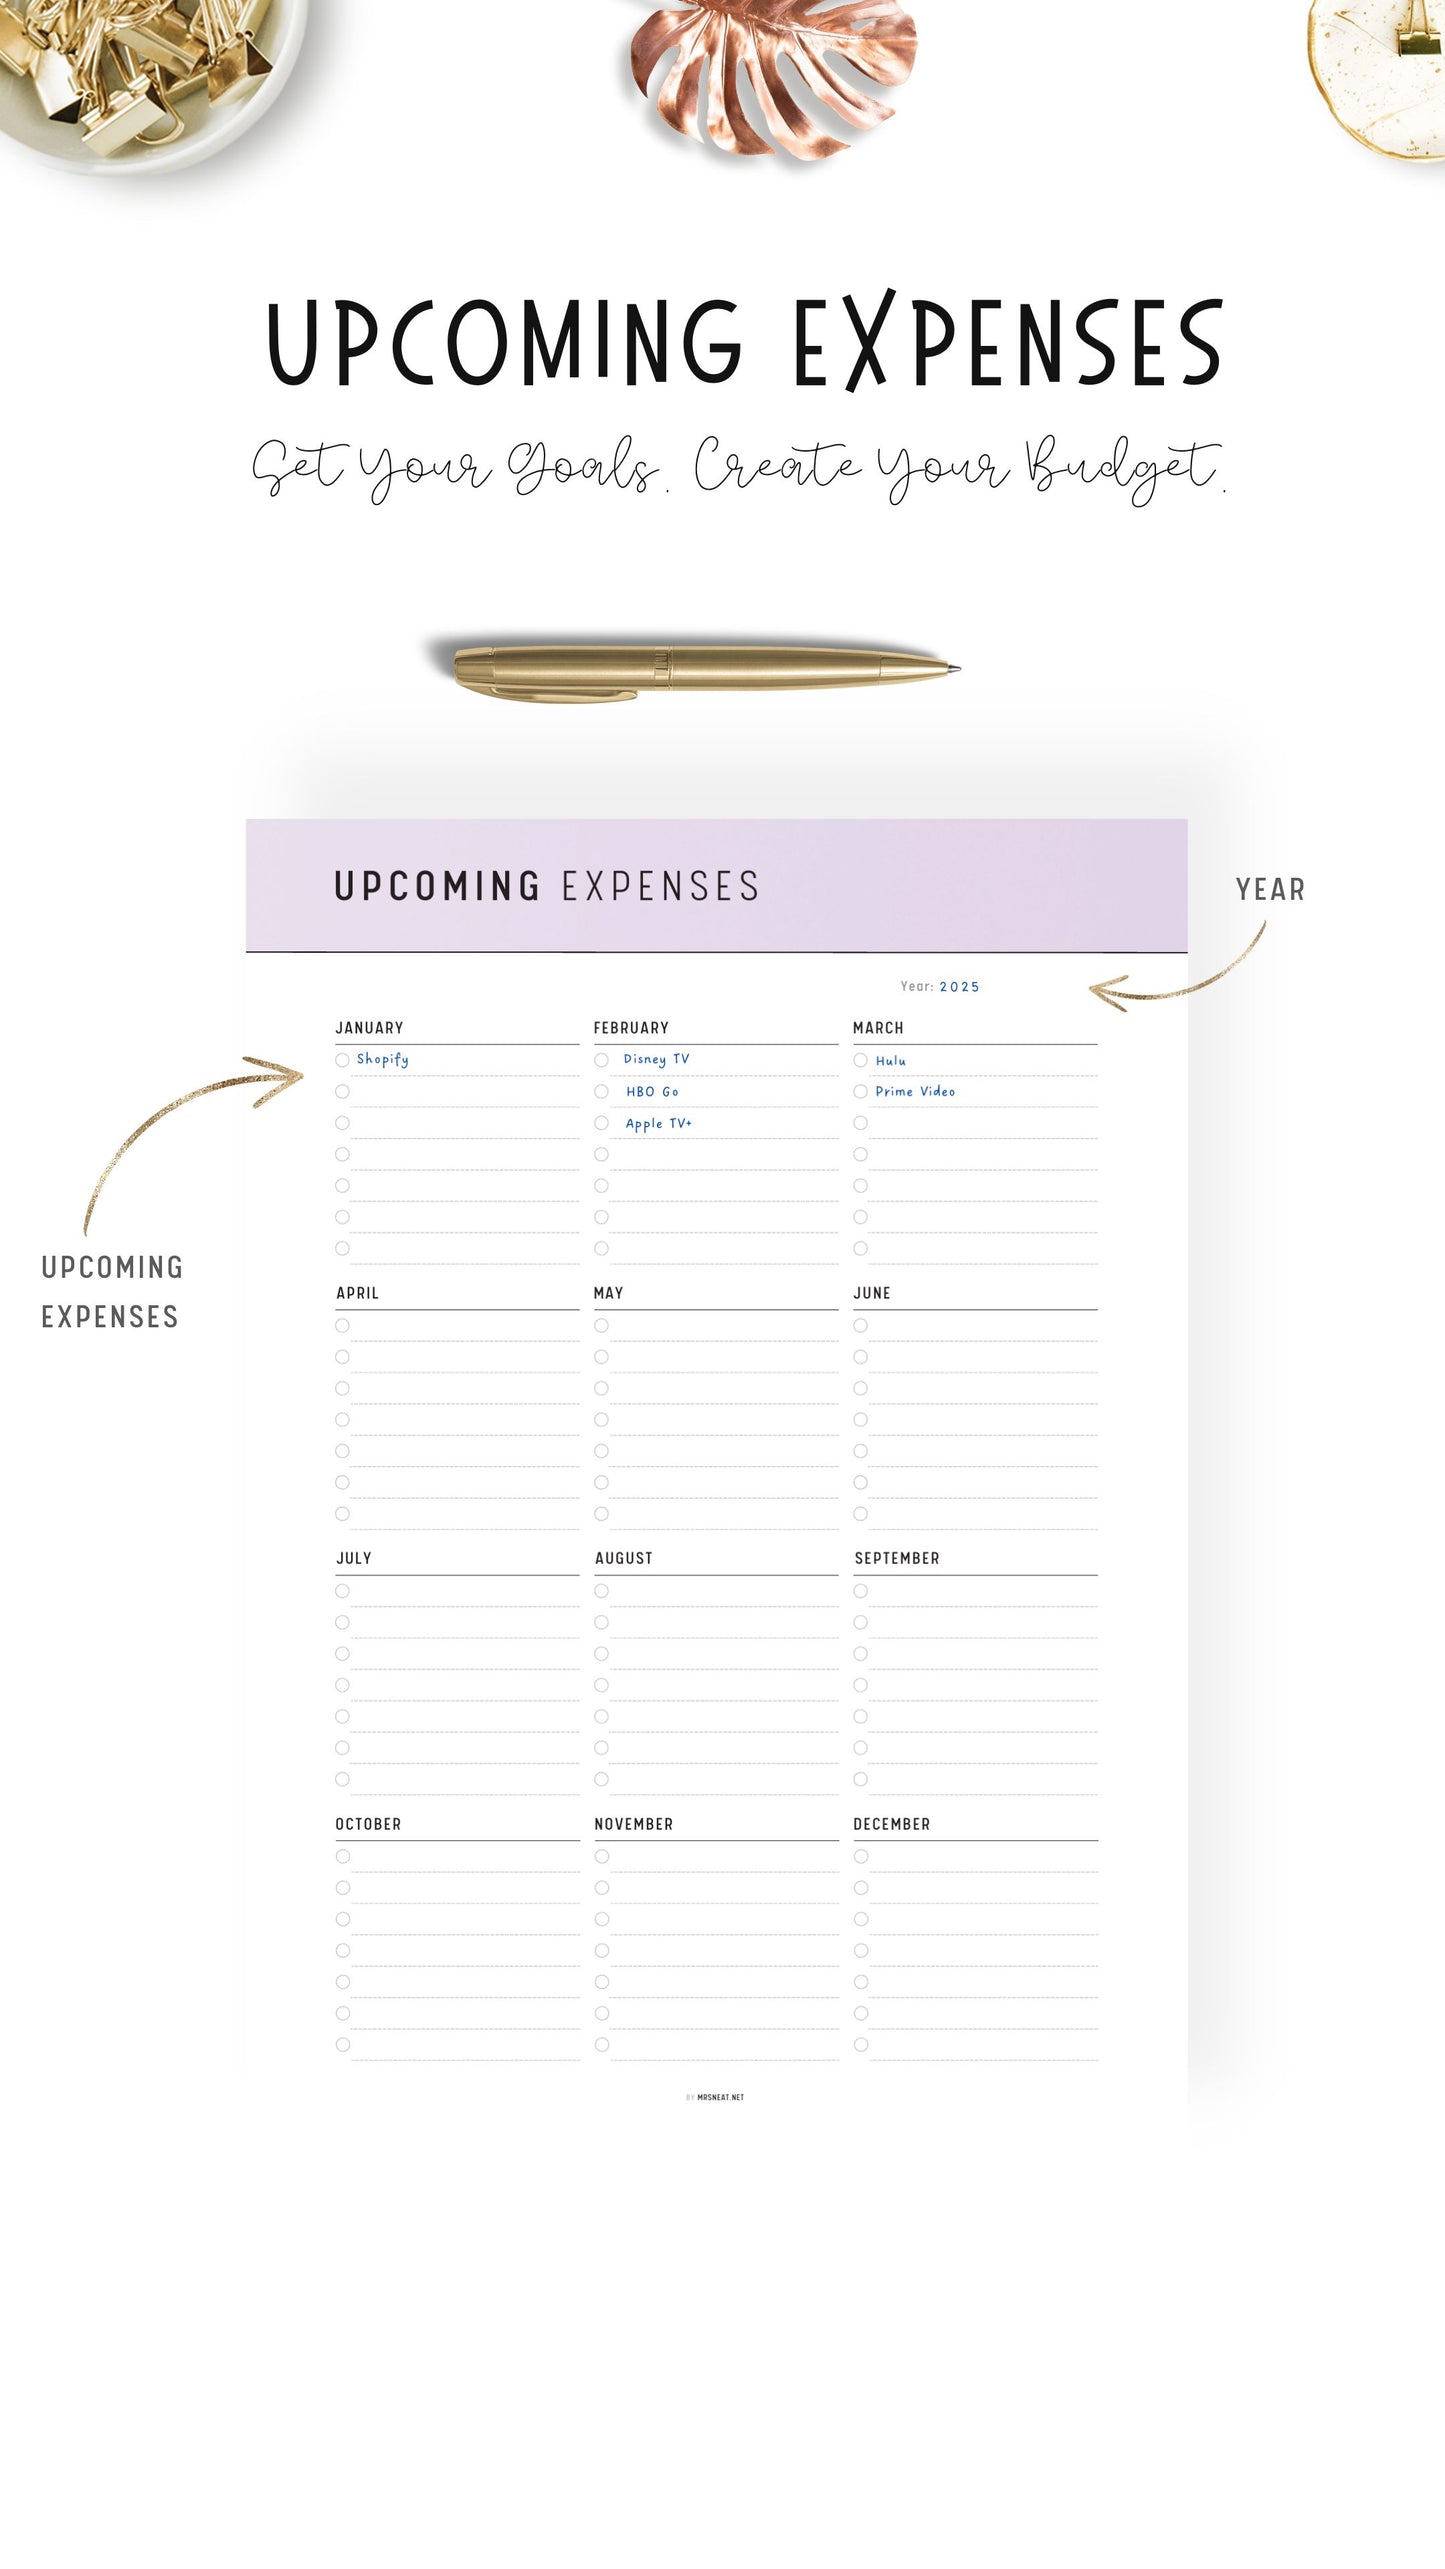 How to use Upcoming Expenses Template Printable